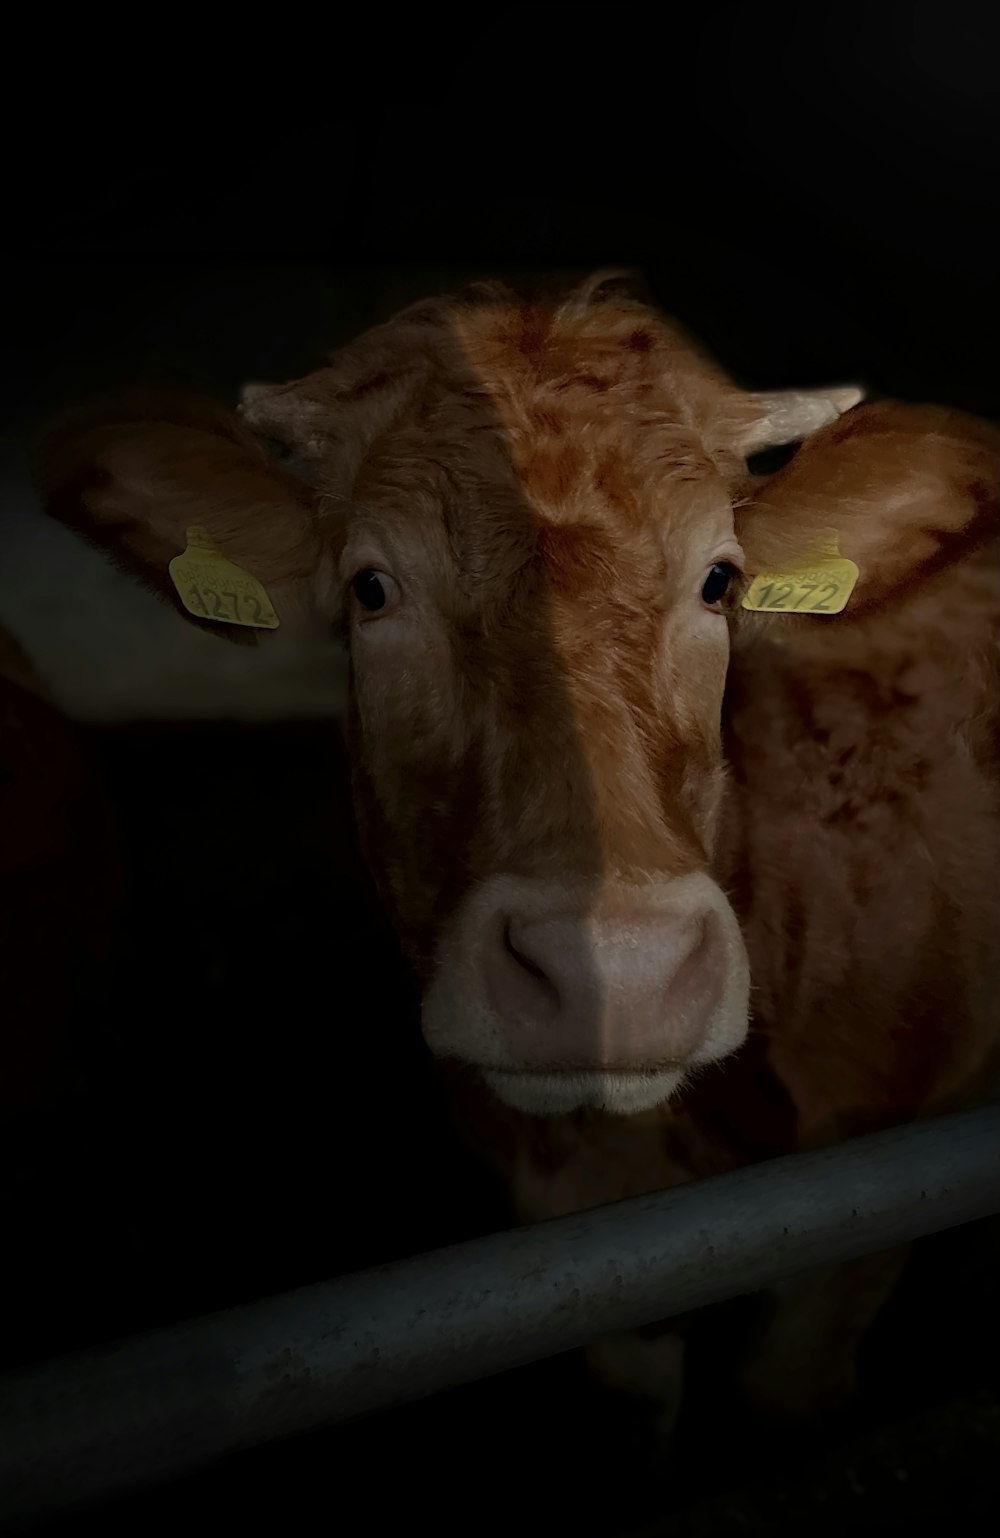 a brown cow with a yellow tag on its ear